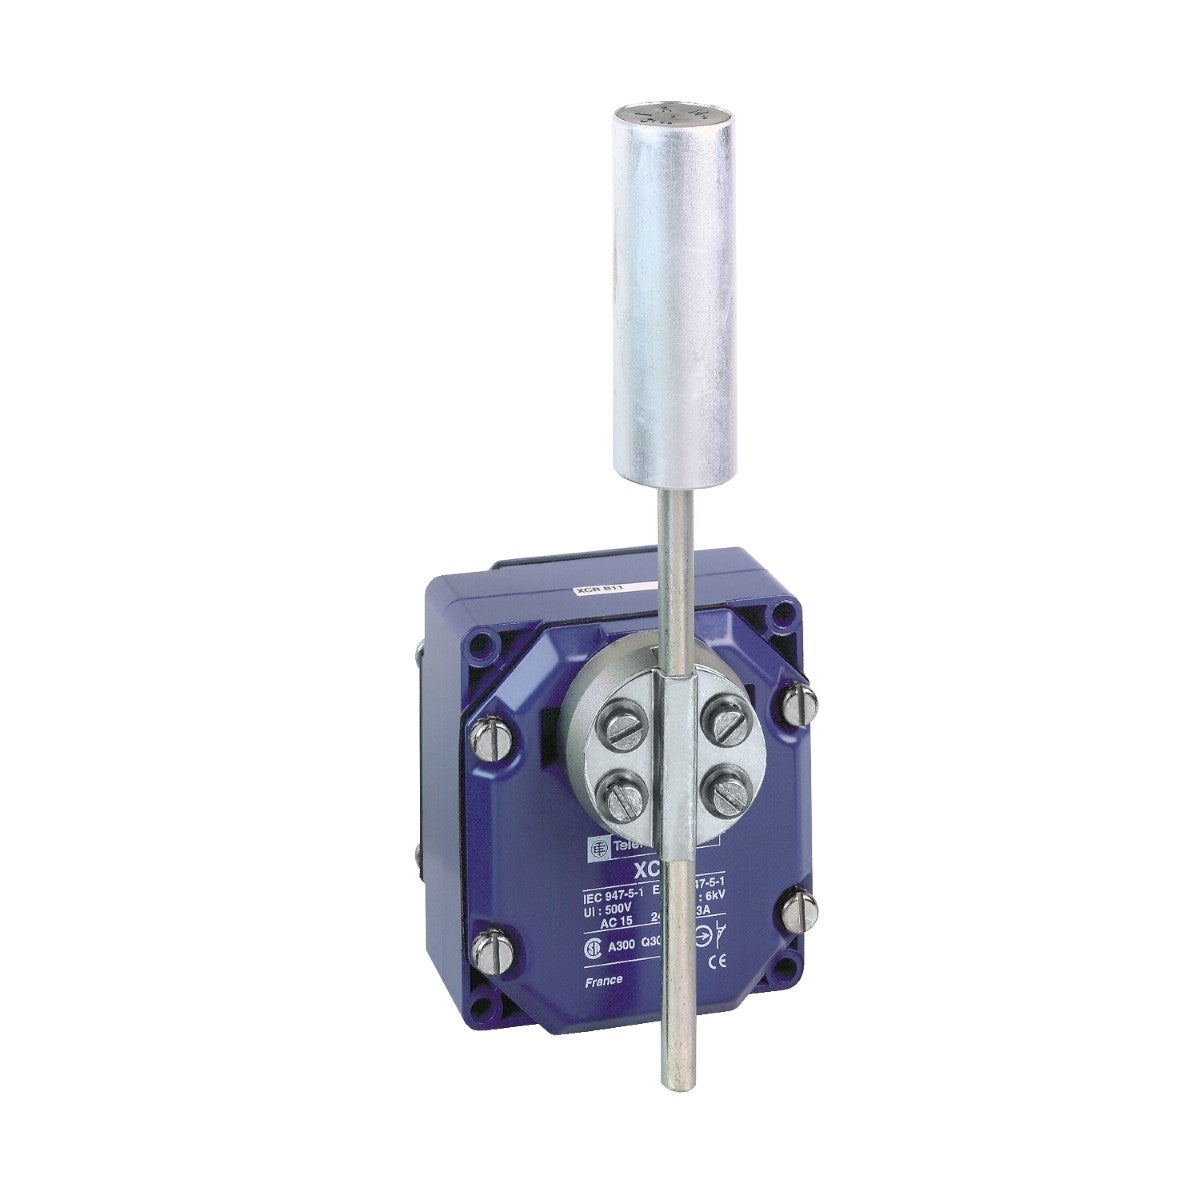 Limit switch, Limit switches XC Standard, XCRT, metal enclosure stainless steel roller with lever, 2C/O